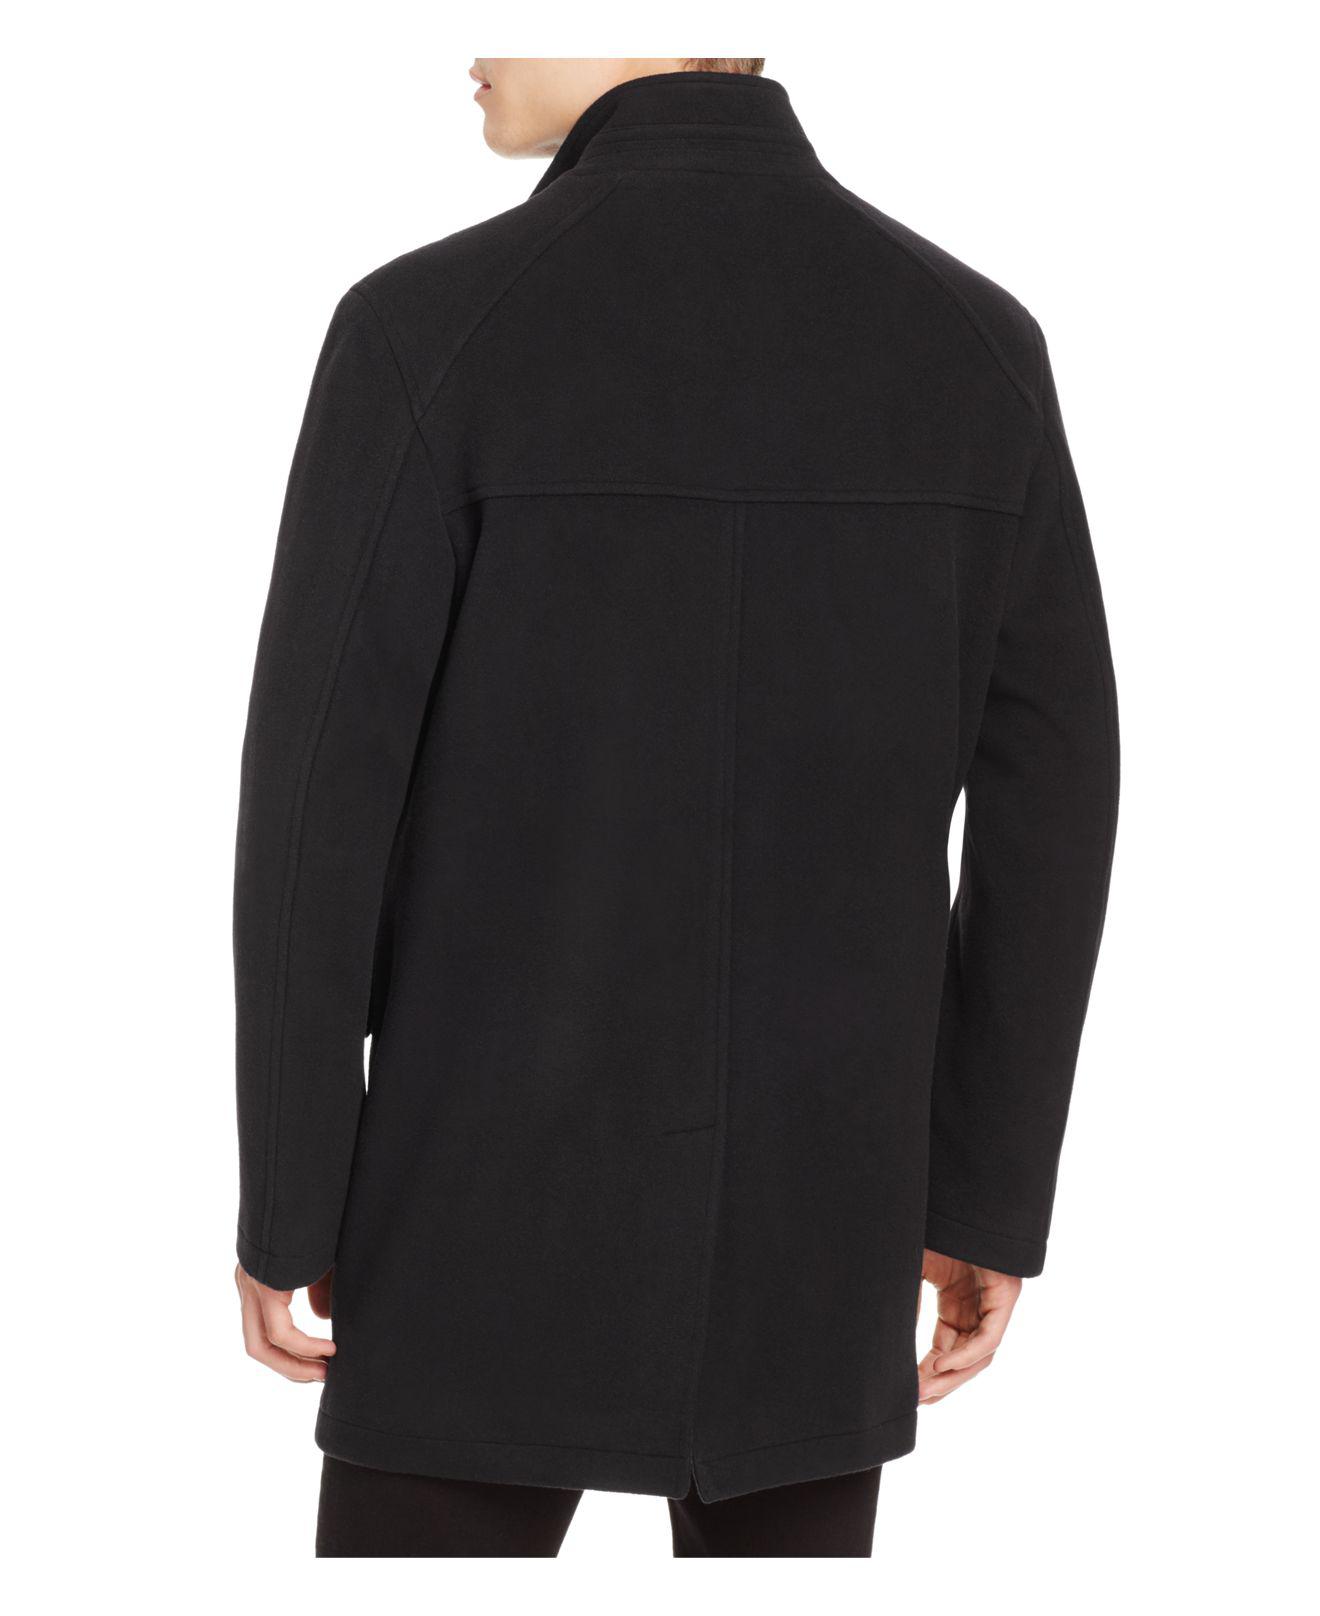 Lyst - Cole haan Wool Cashmere Car Coat in Black for Men